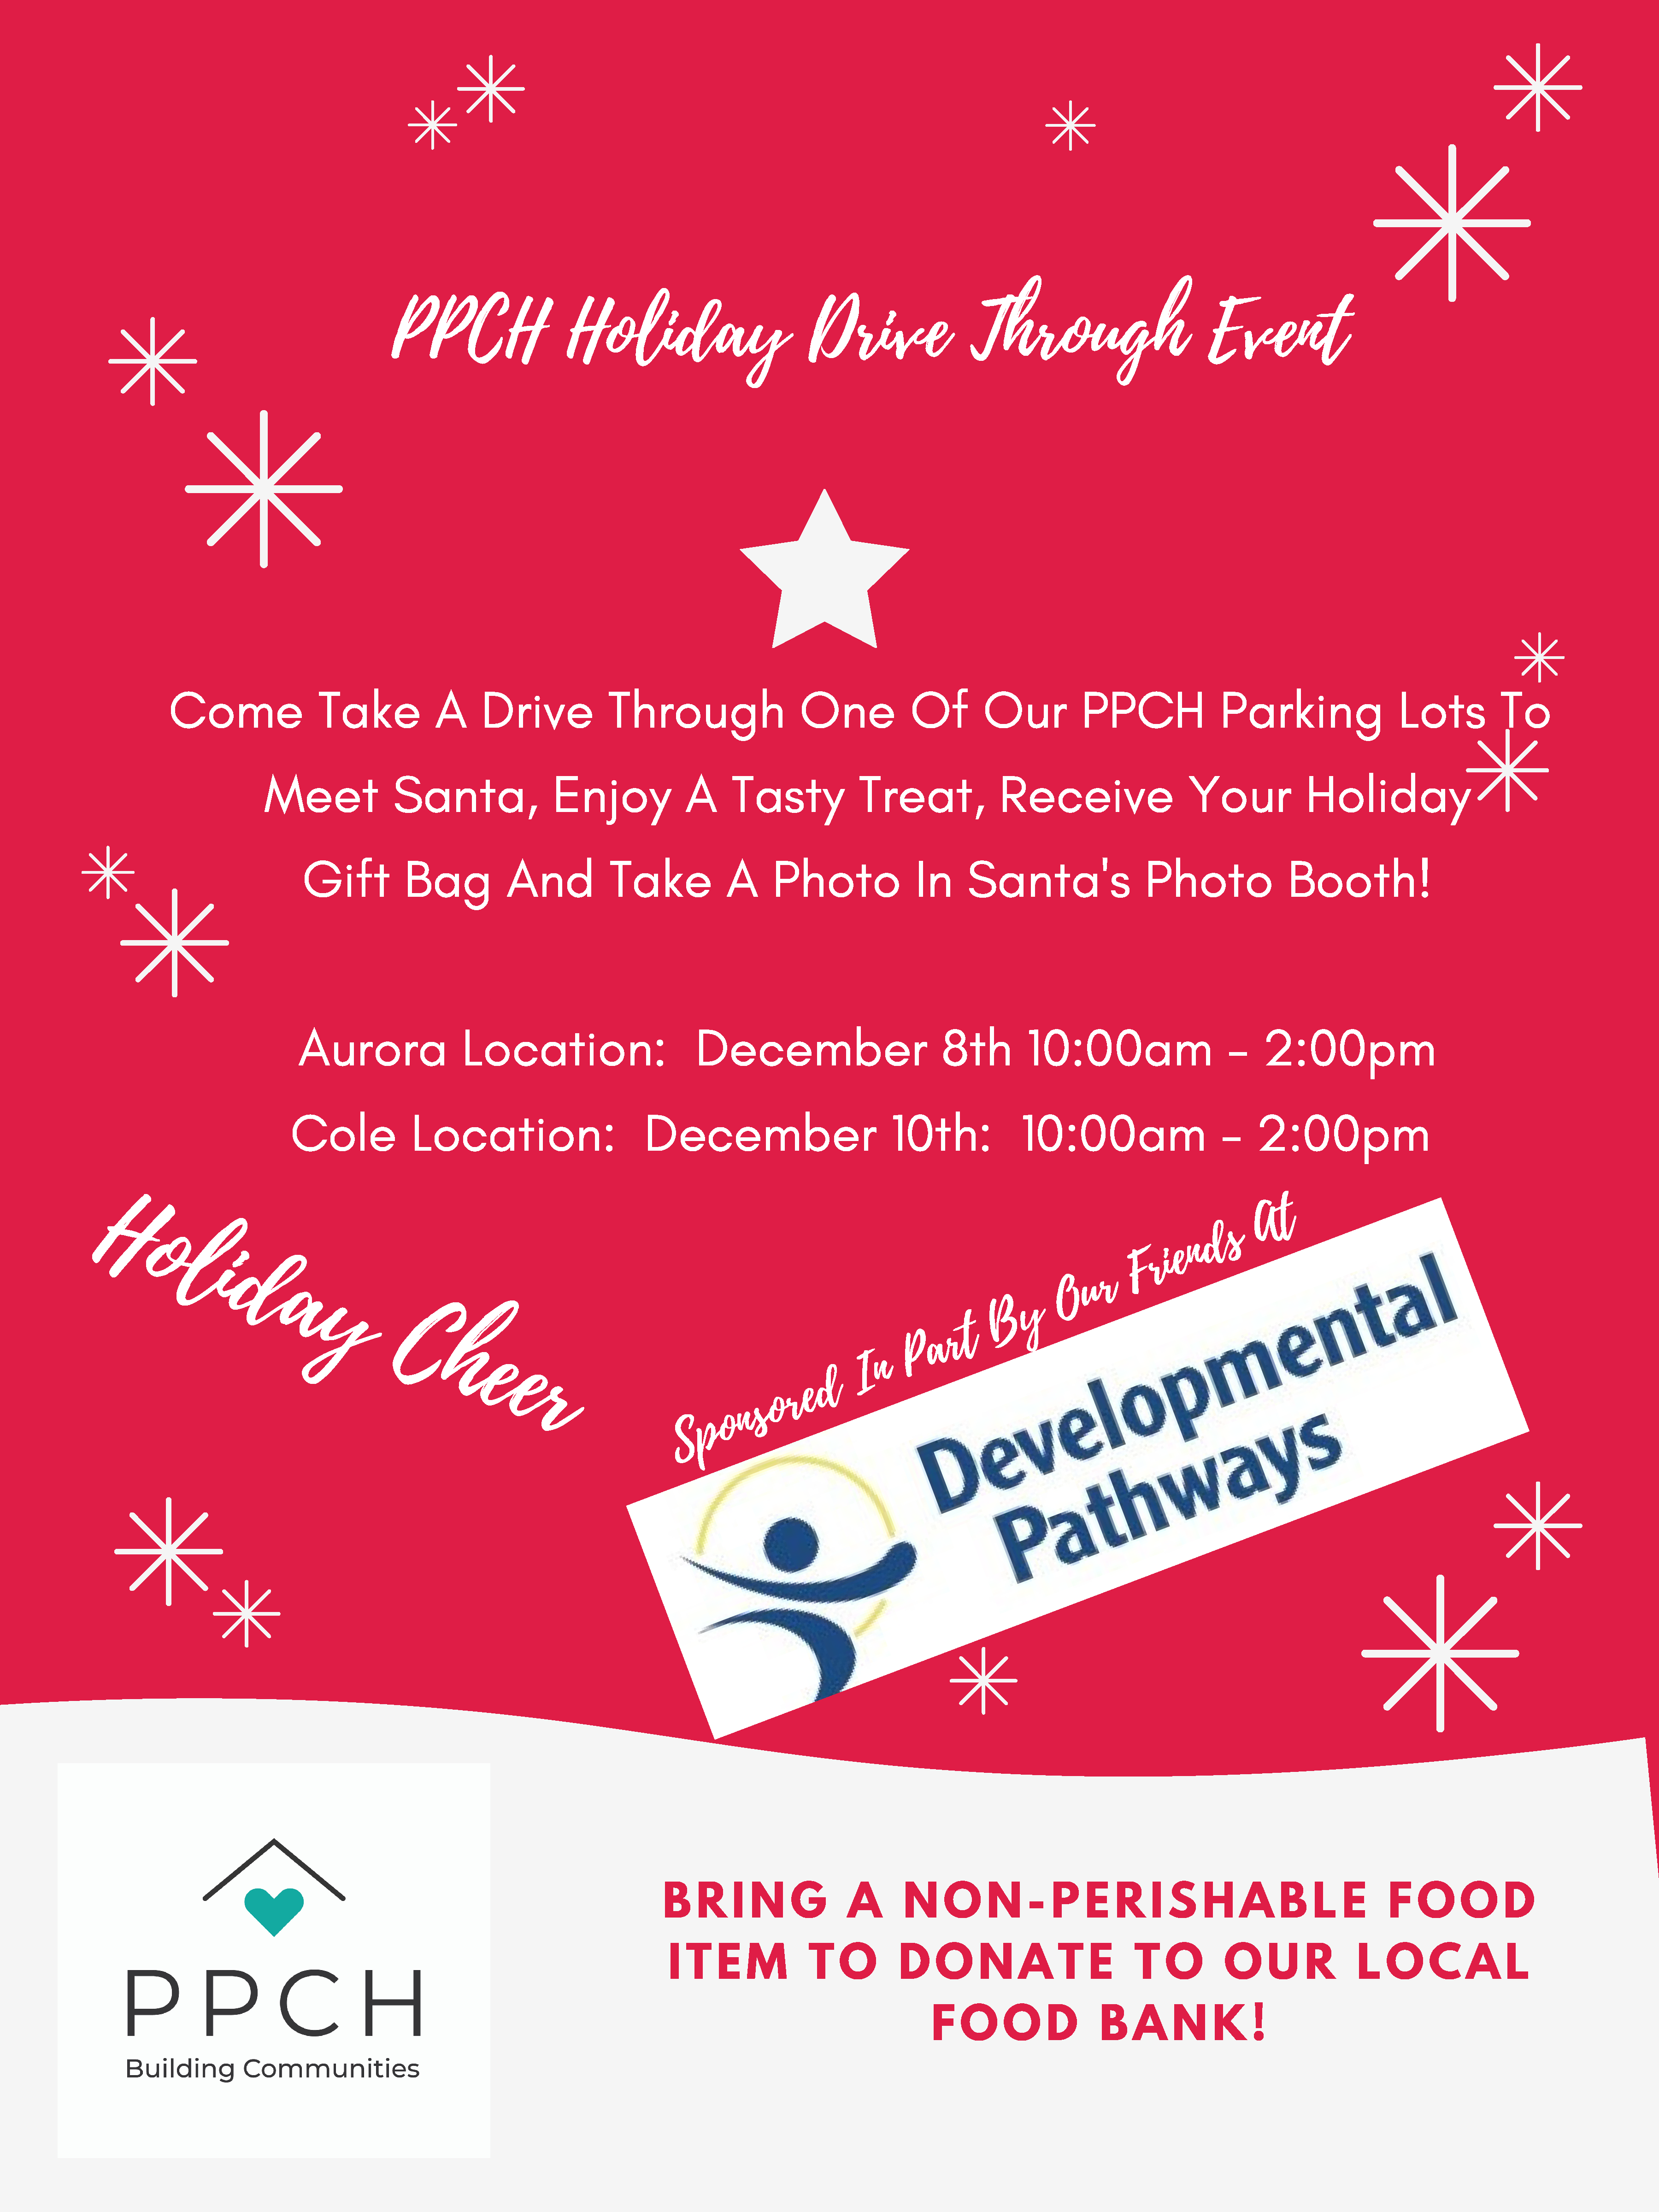 PPCH Holiday Drive Through Event flyer with a red background and Developmental Pathways and PPCH logo